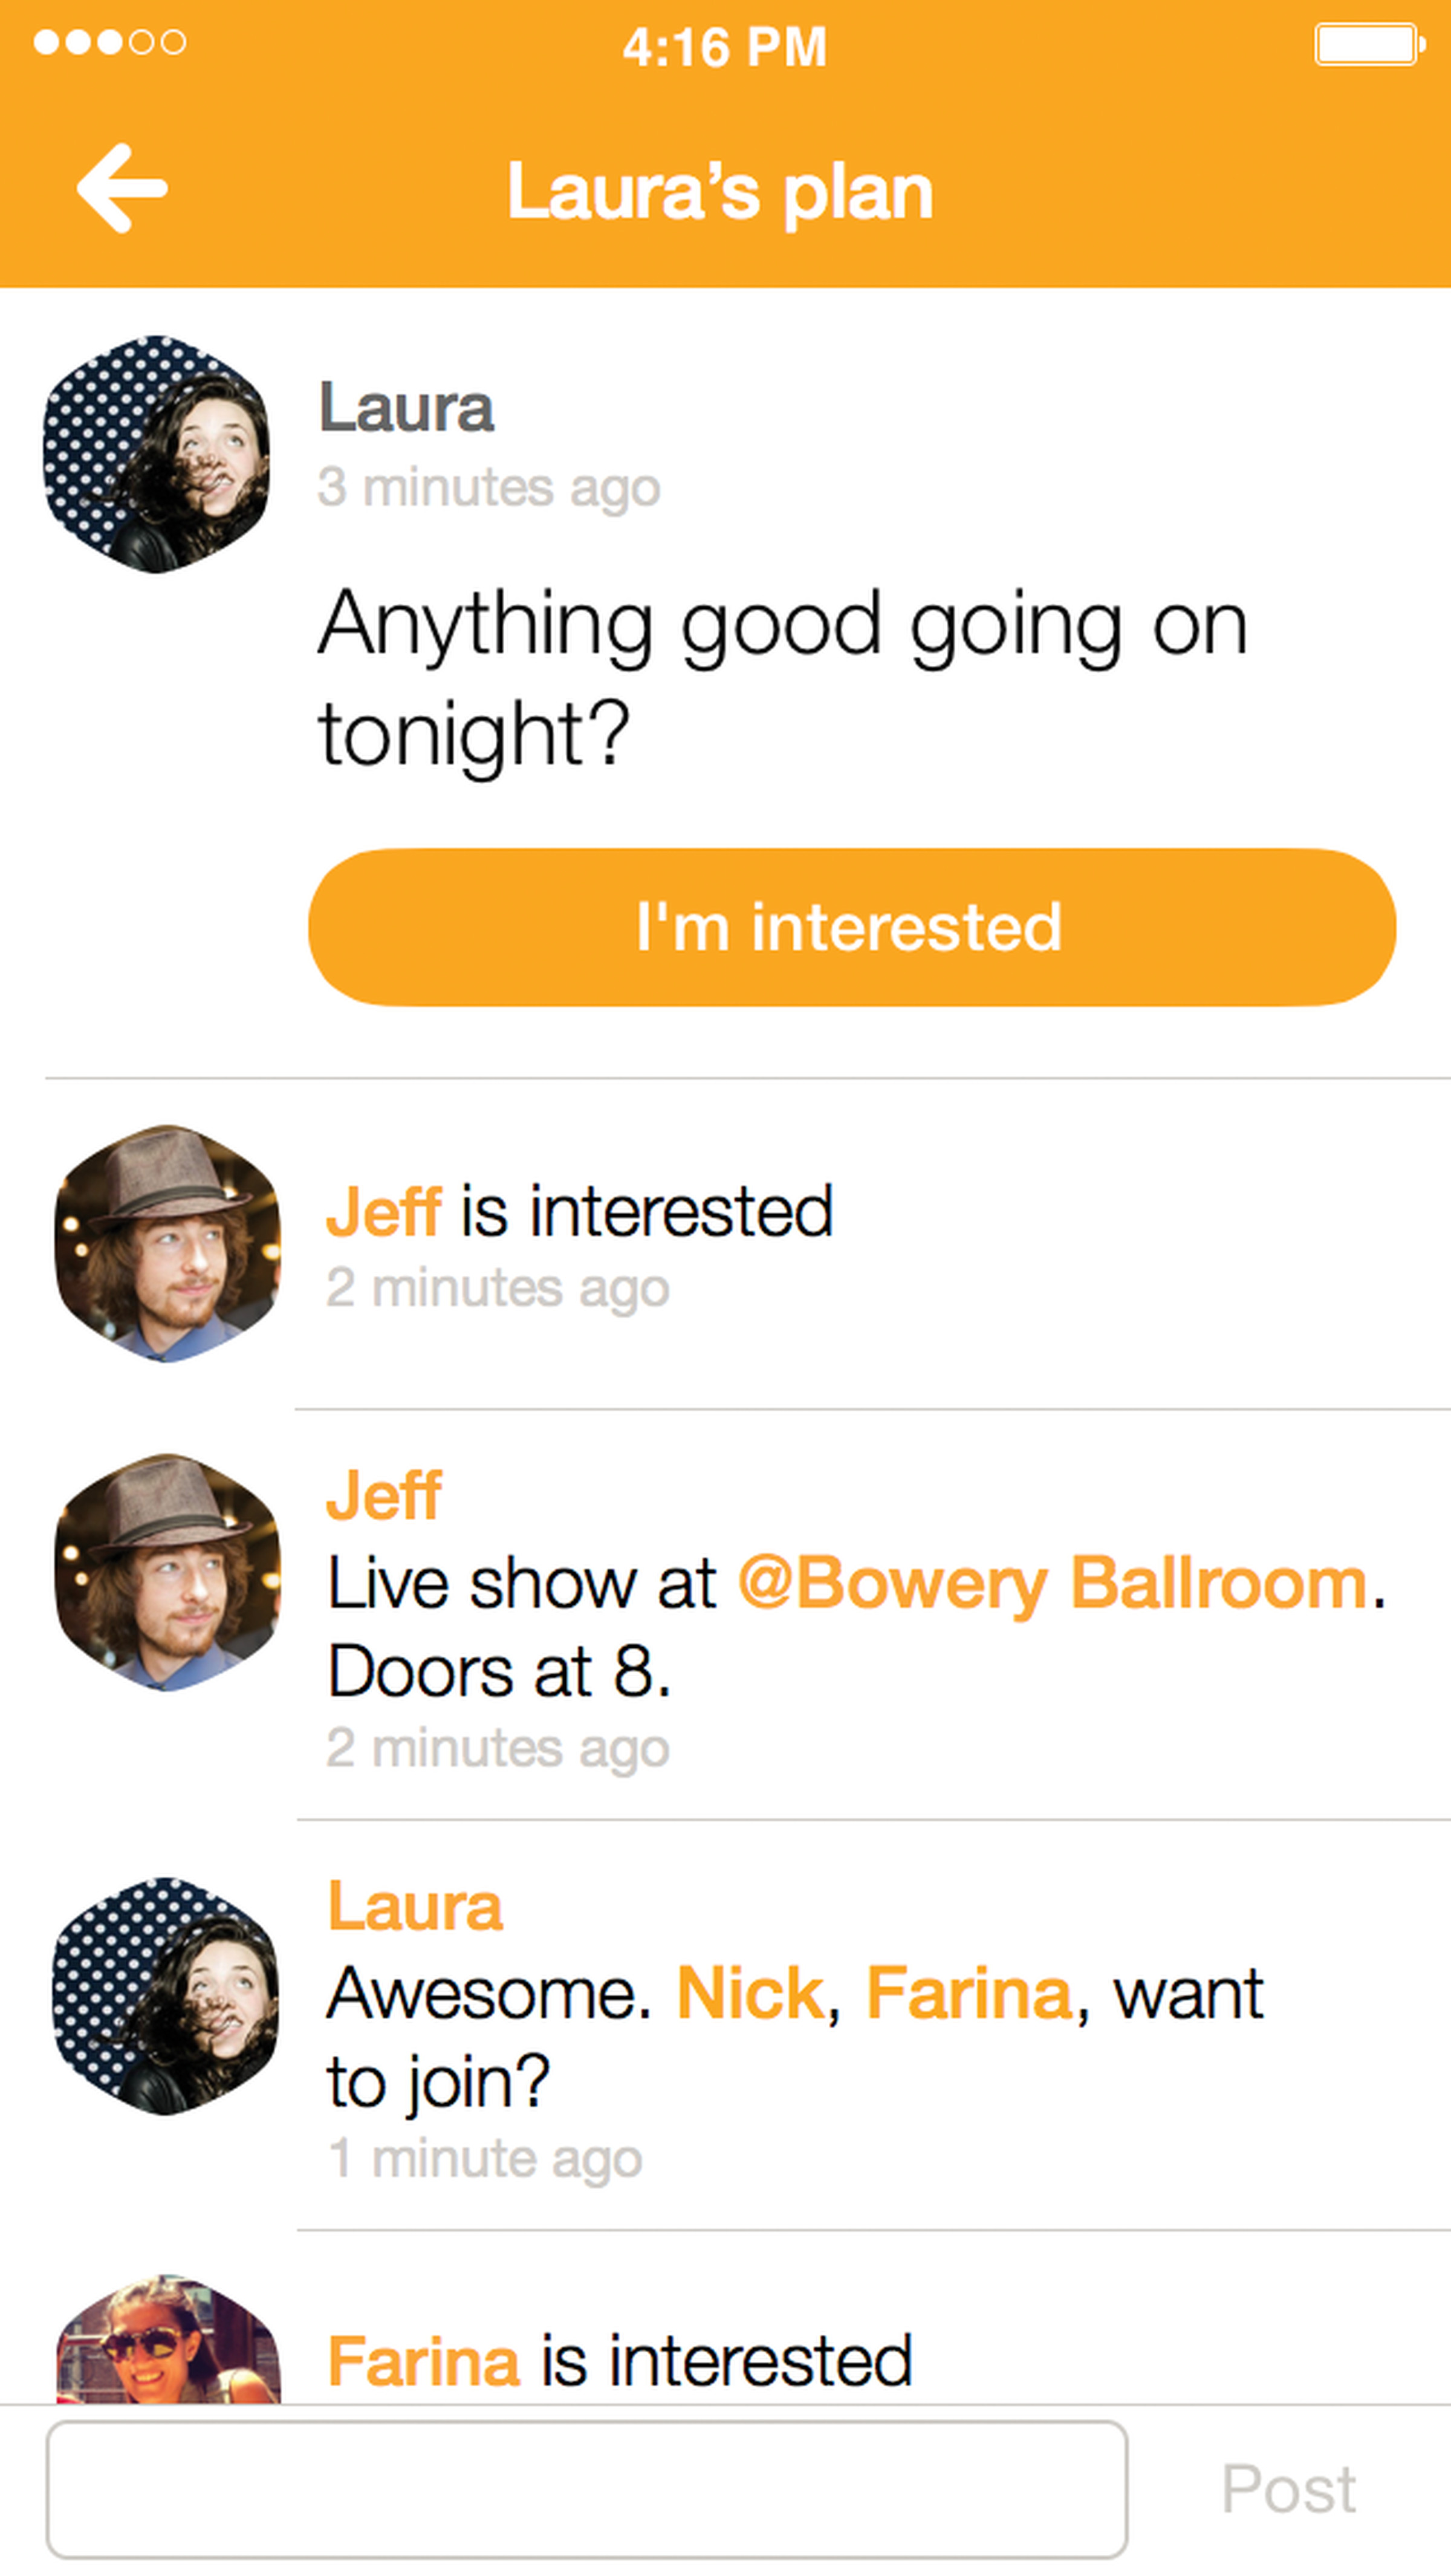 Foursquare Swarm for iPhone screenshots